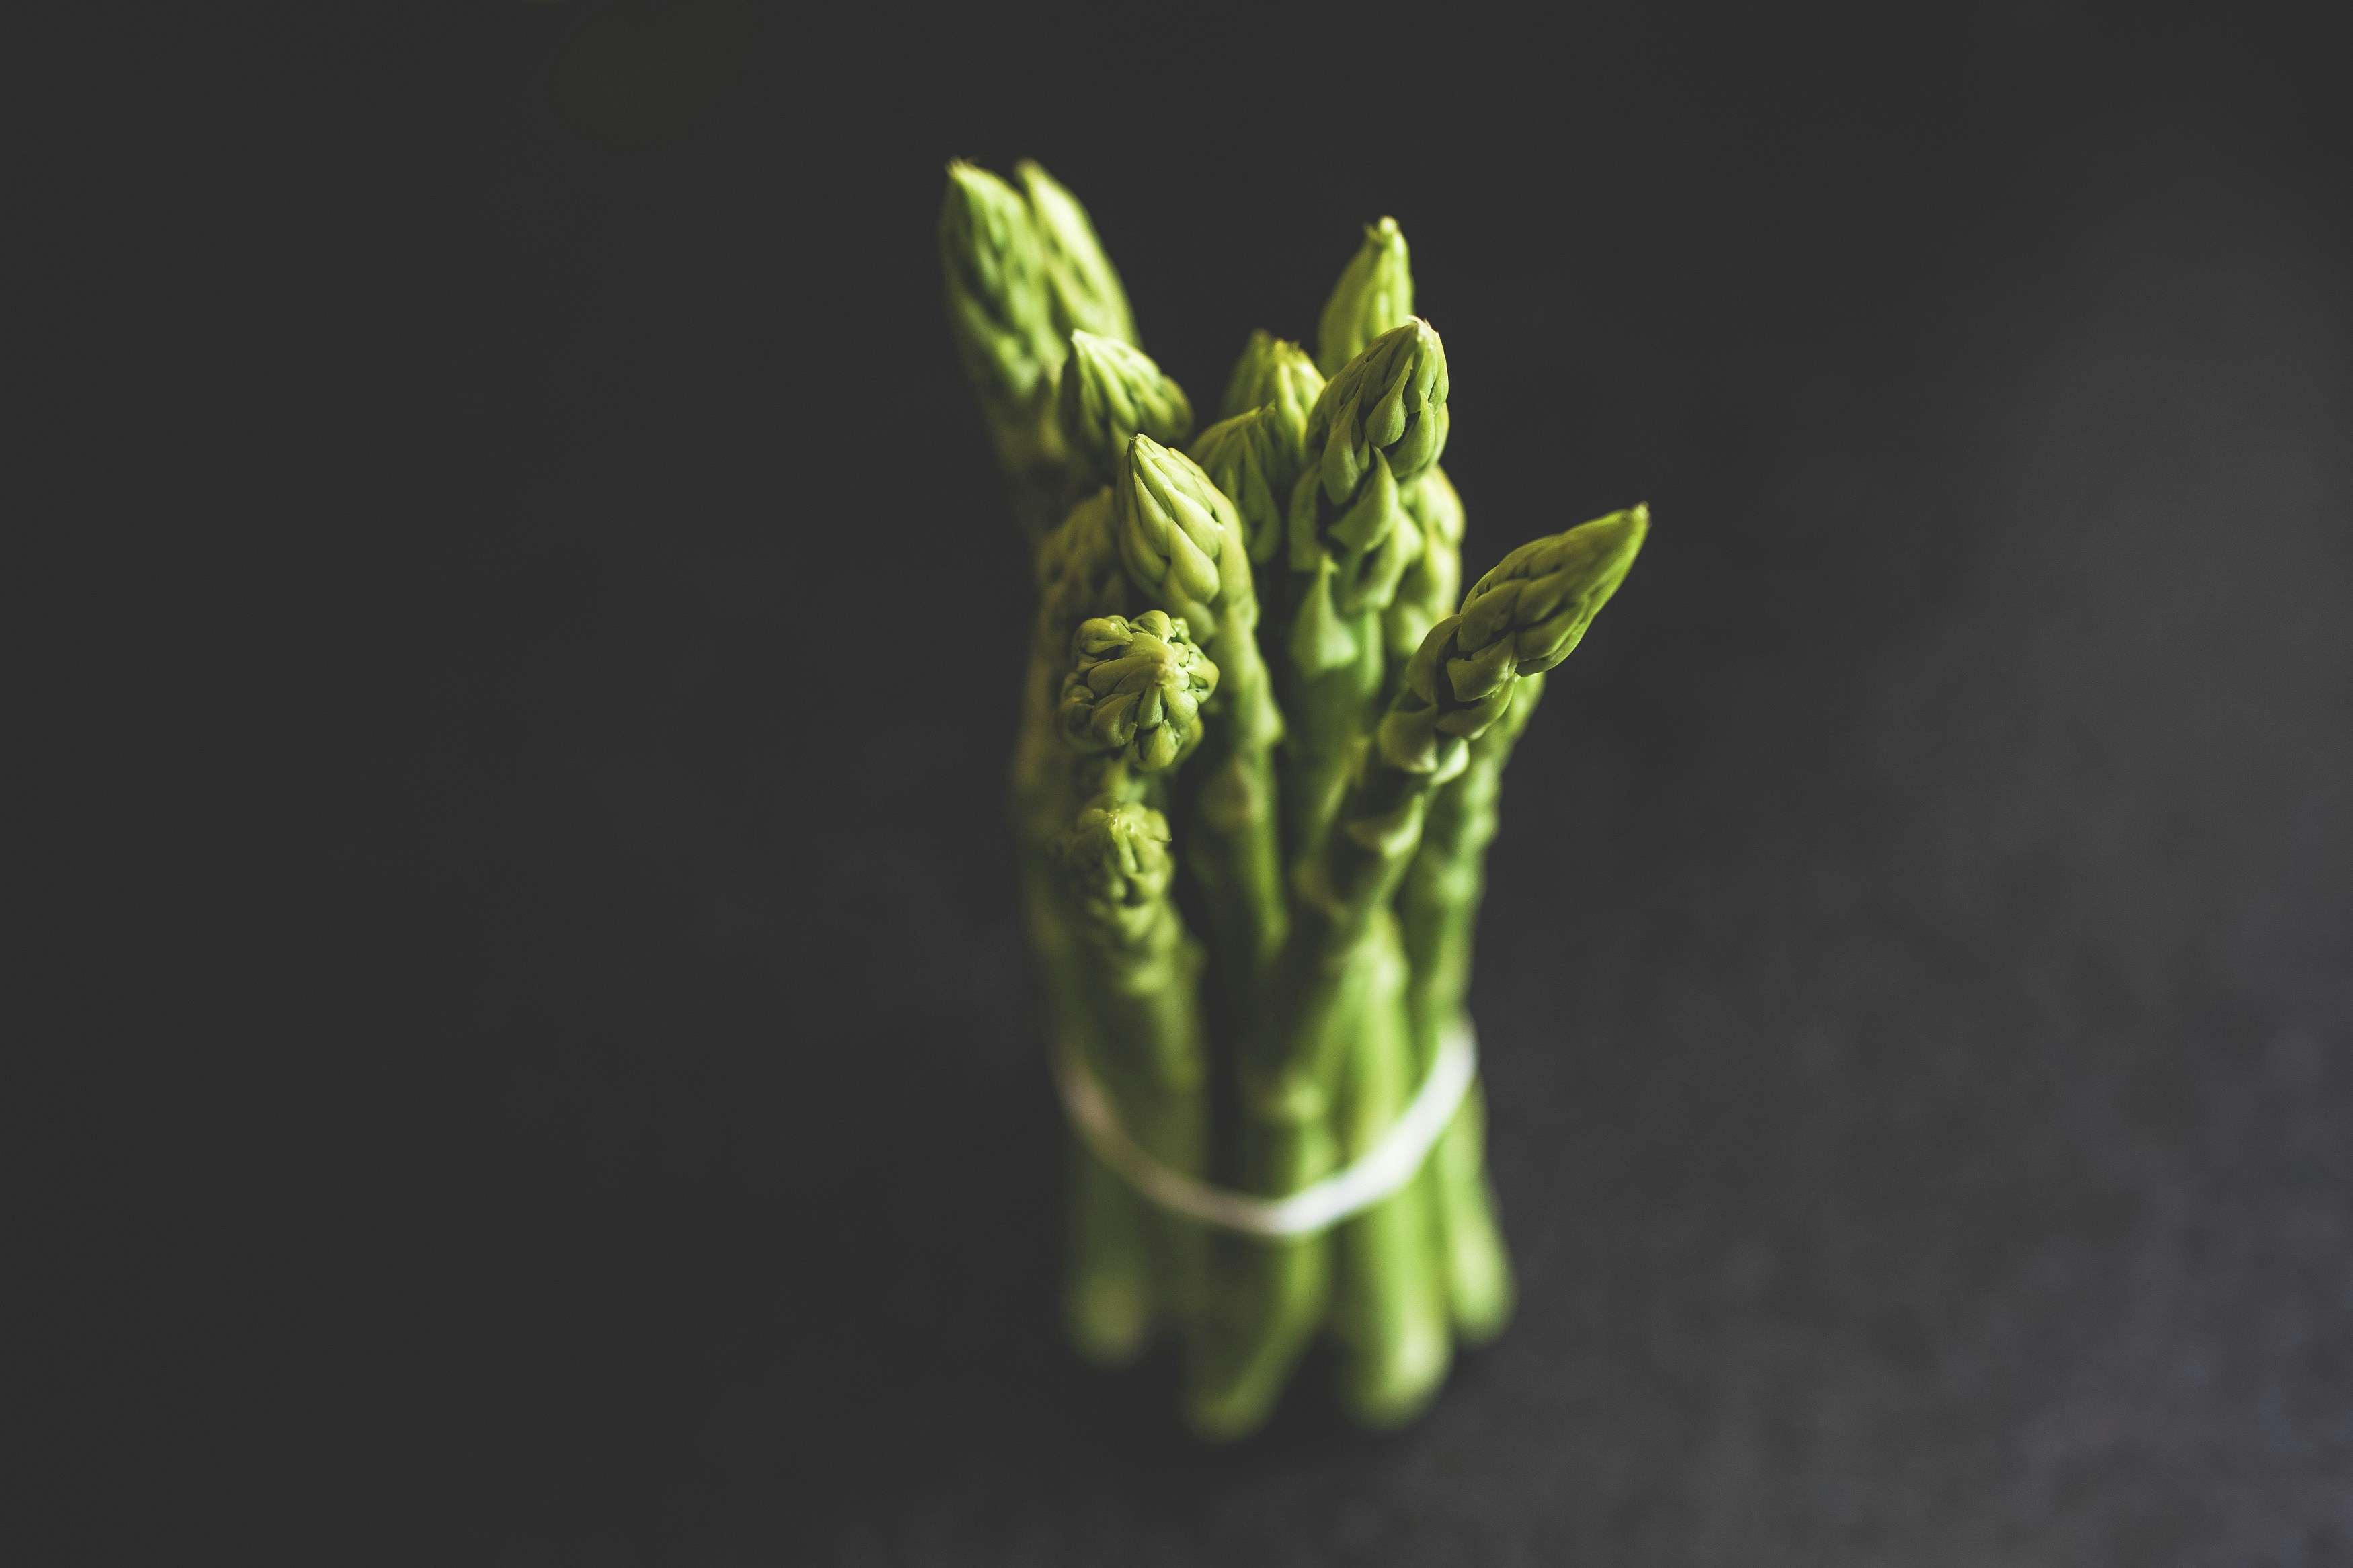 Fresh green bio quality asparagus from the local farmers market. Support your local farmers.